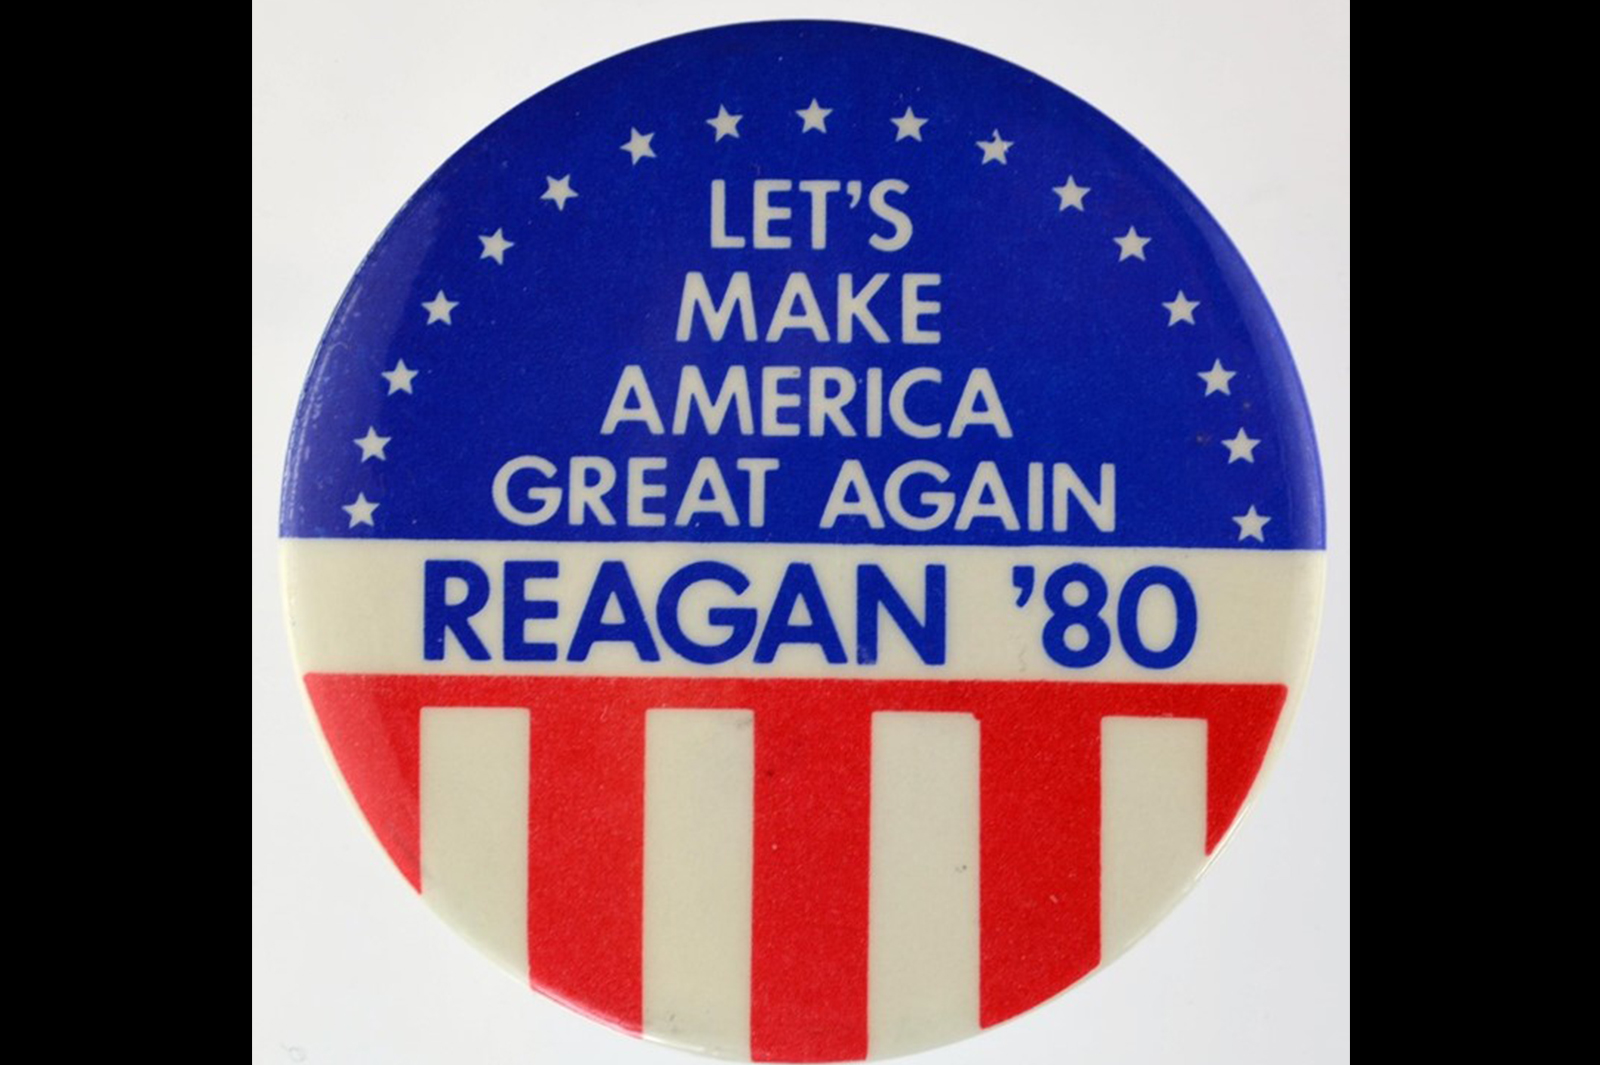 A red, white and blue coloured circular badge with the wording Let's Make America Great Again Reagan '80. The badge is decorated with stars and stripes